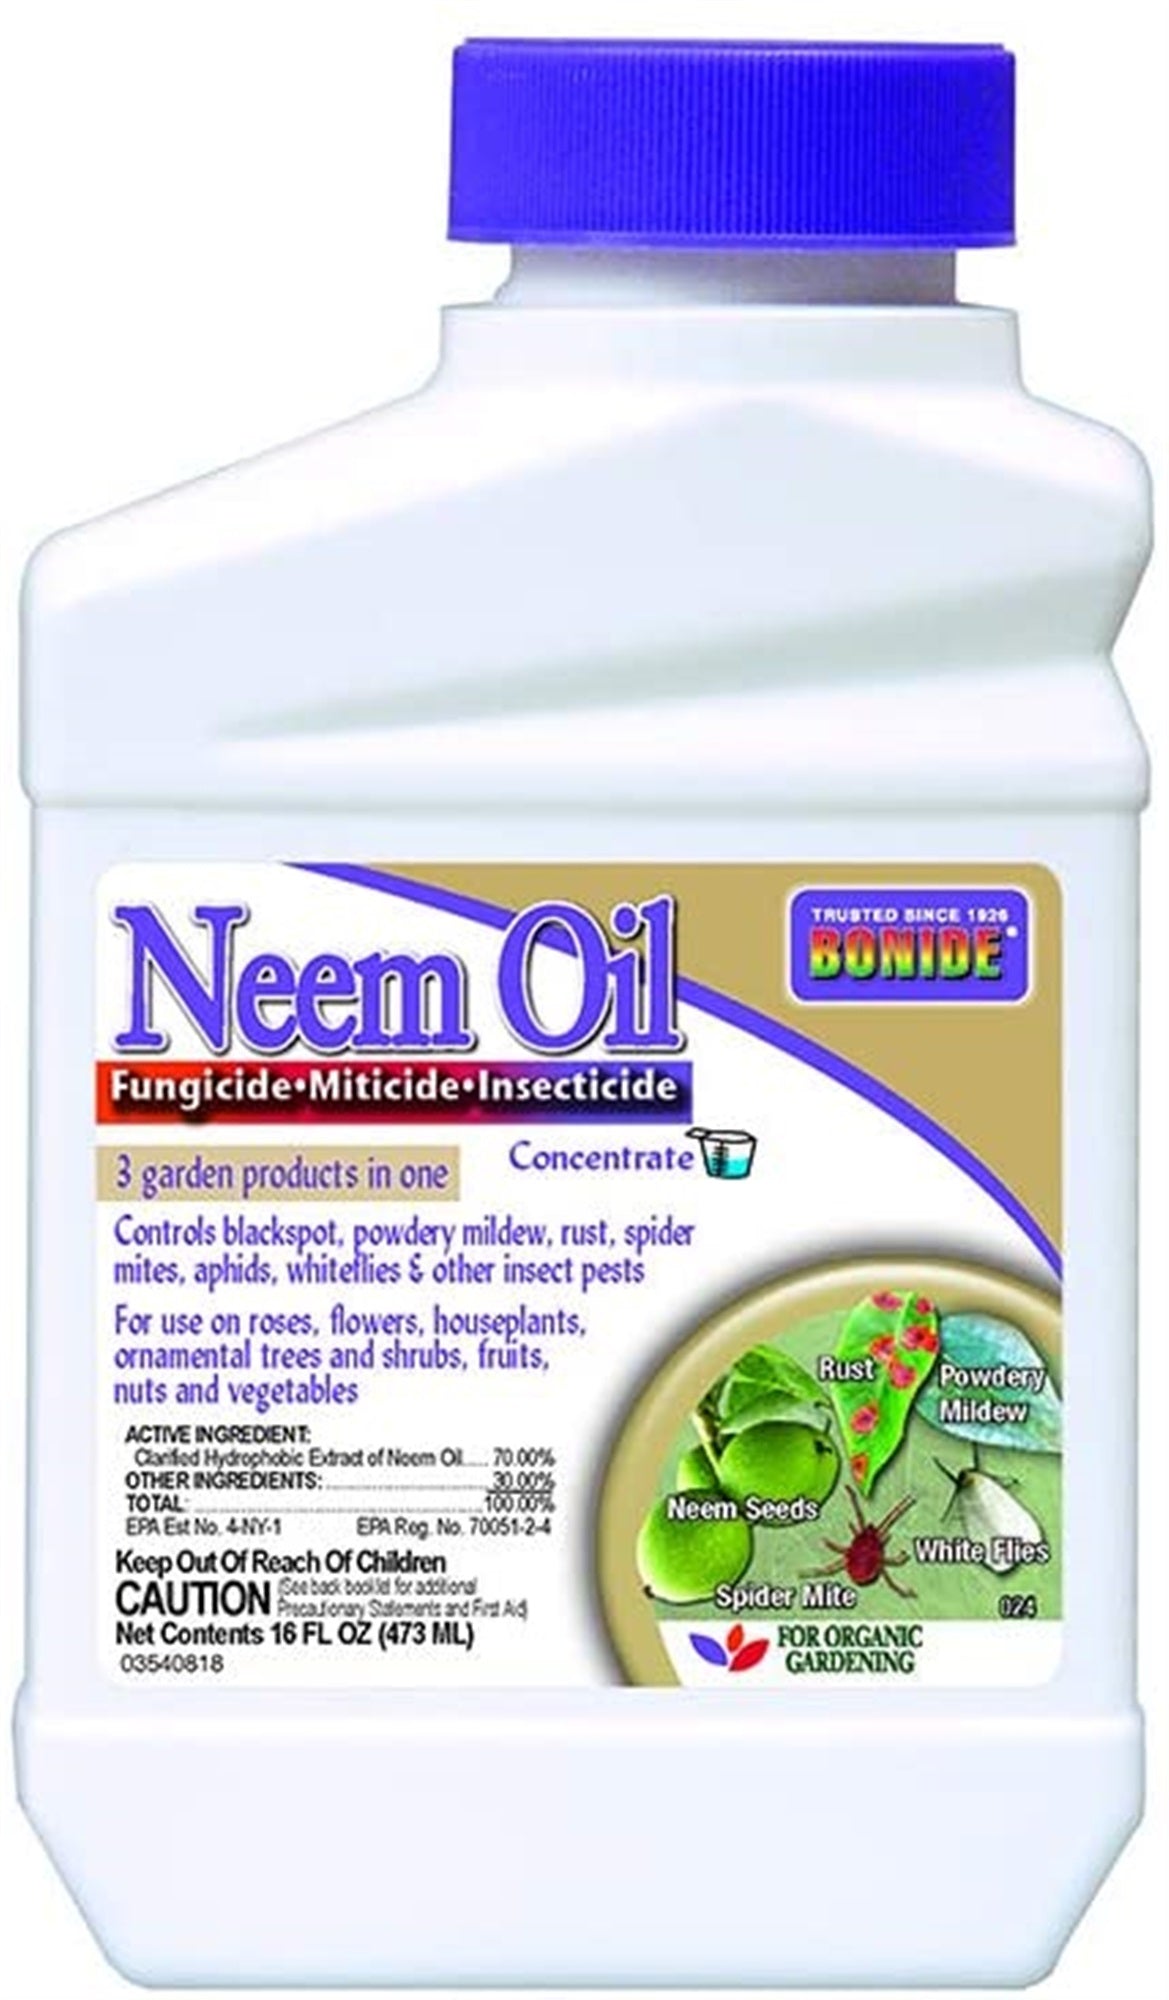 Bonide Neem Oil Fungicide, Miticide, and Insecticide Concentrate 16 fl. oz.